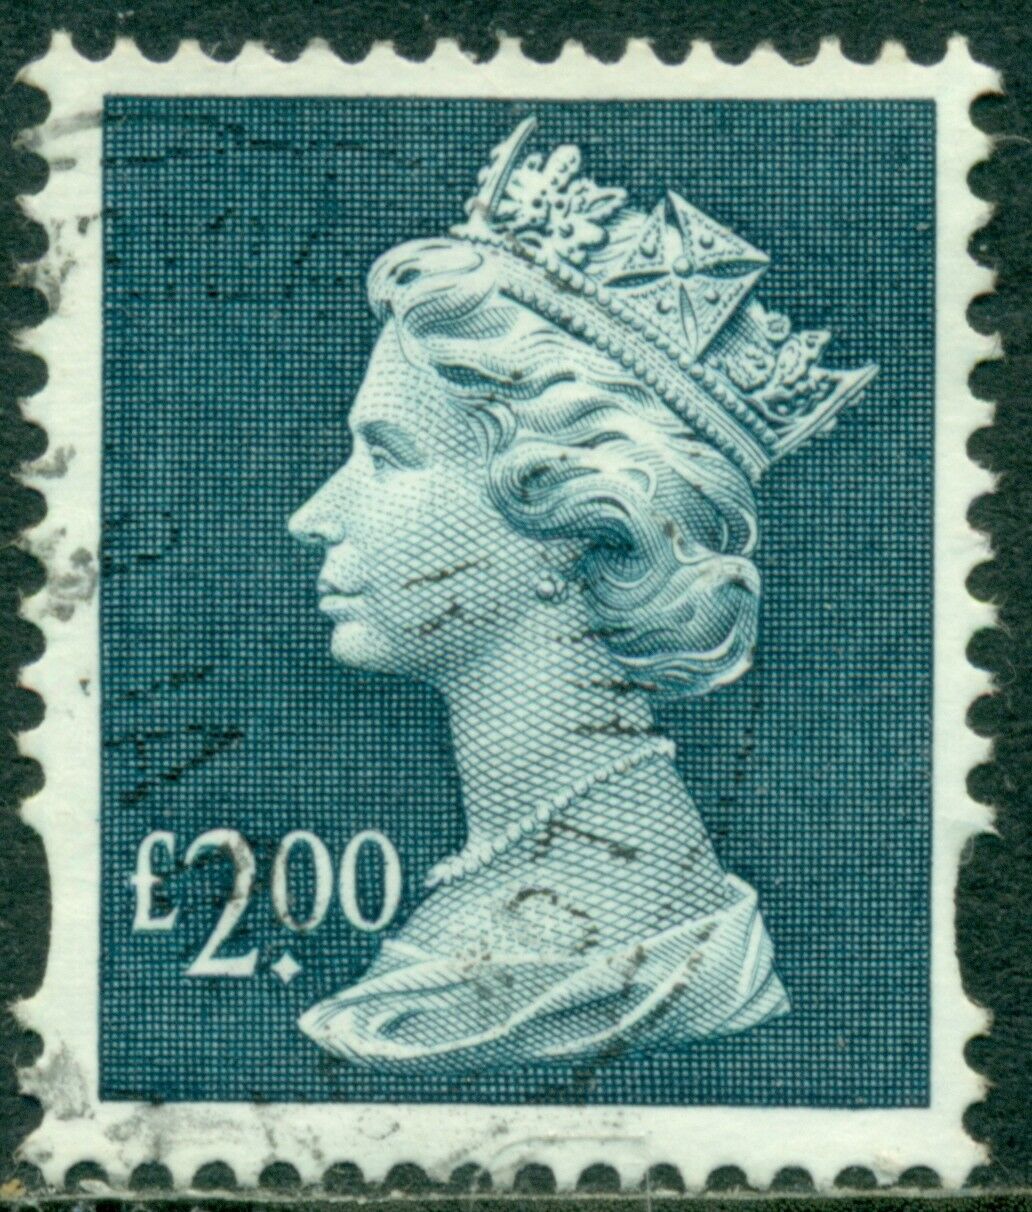 Great Britain Sg-y1801, Scott # Mh-322 Machin, Used, Great Price!